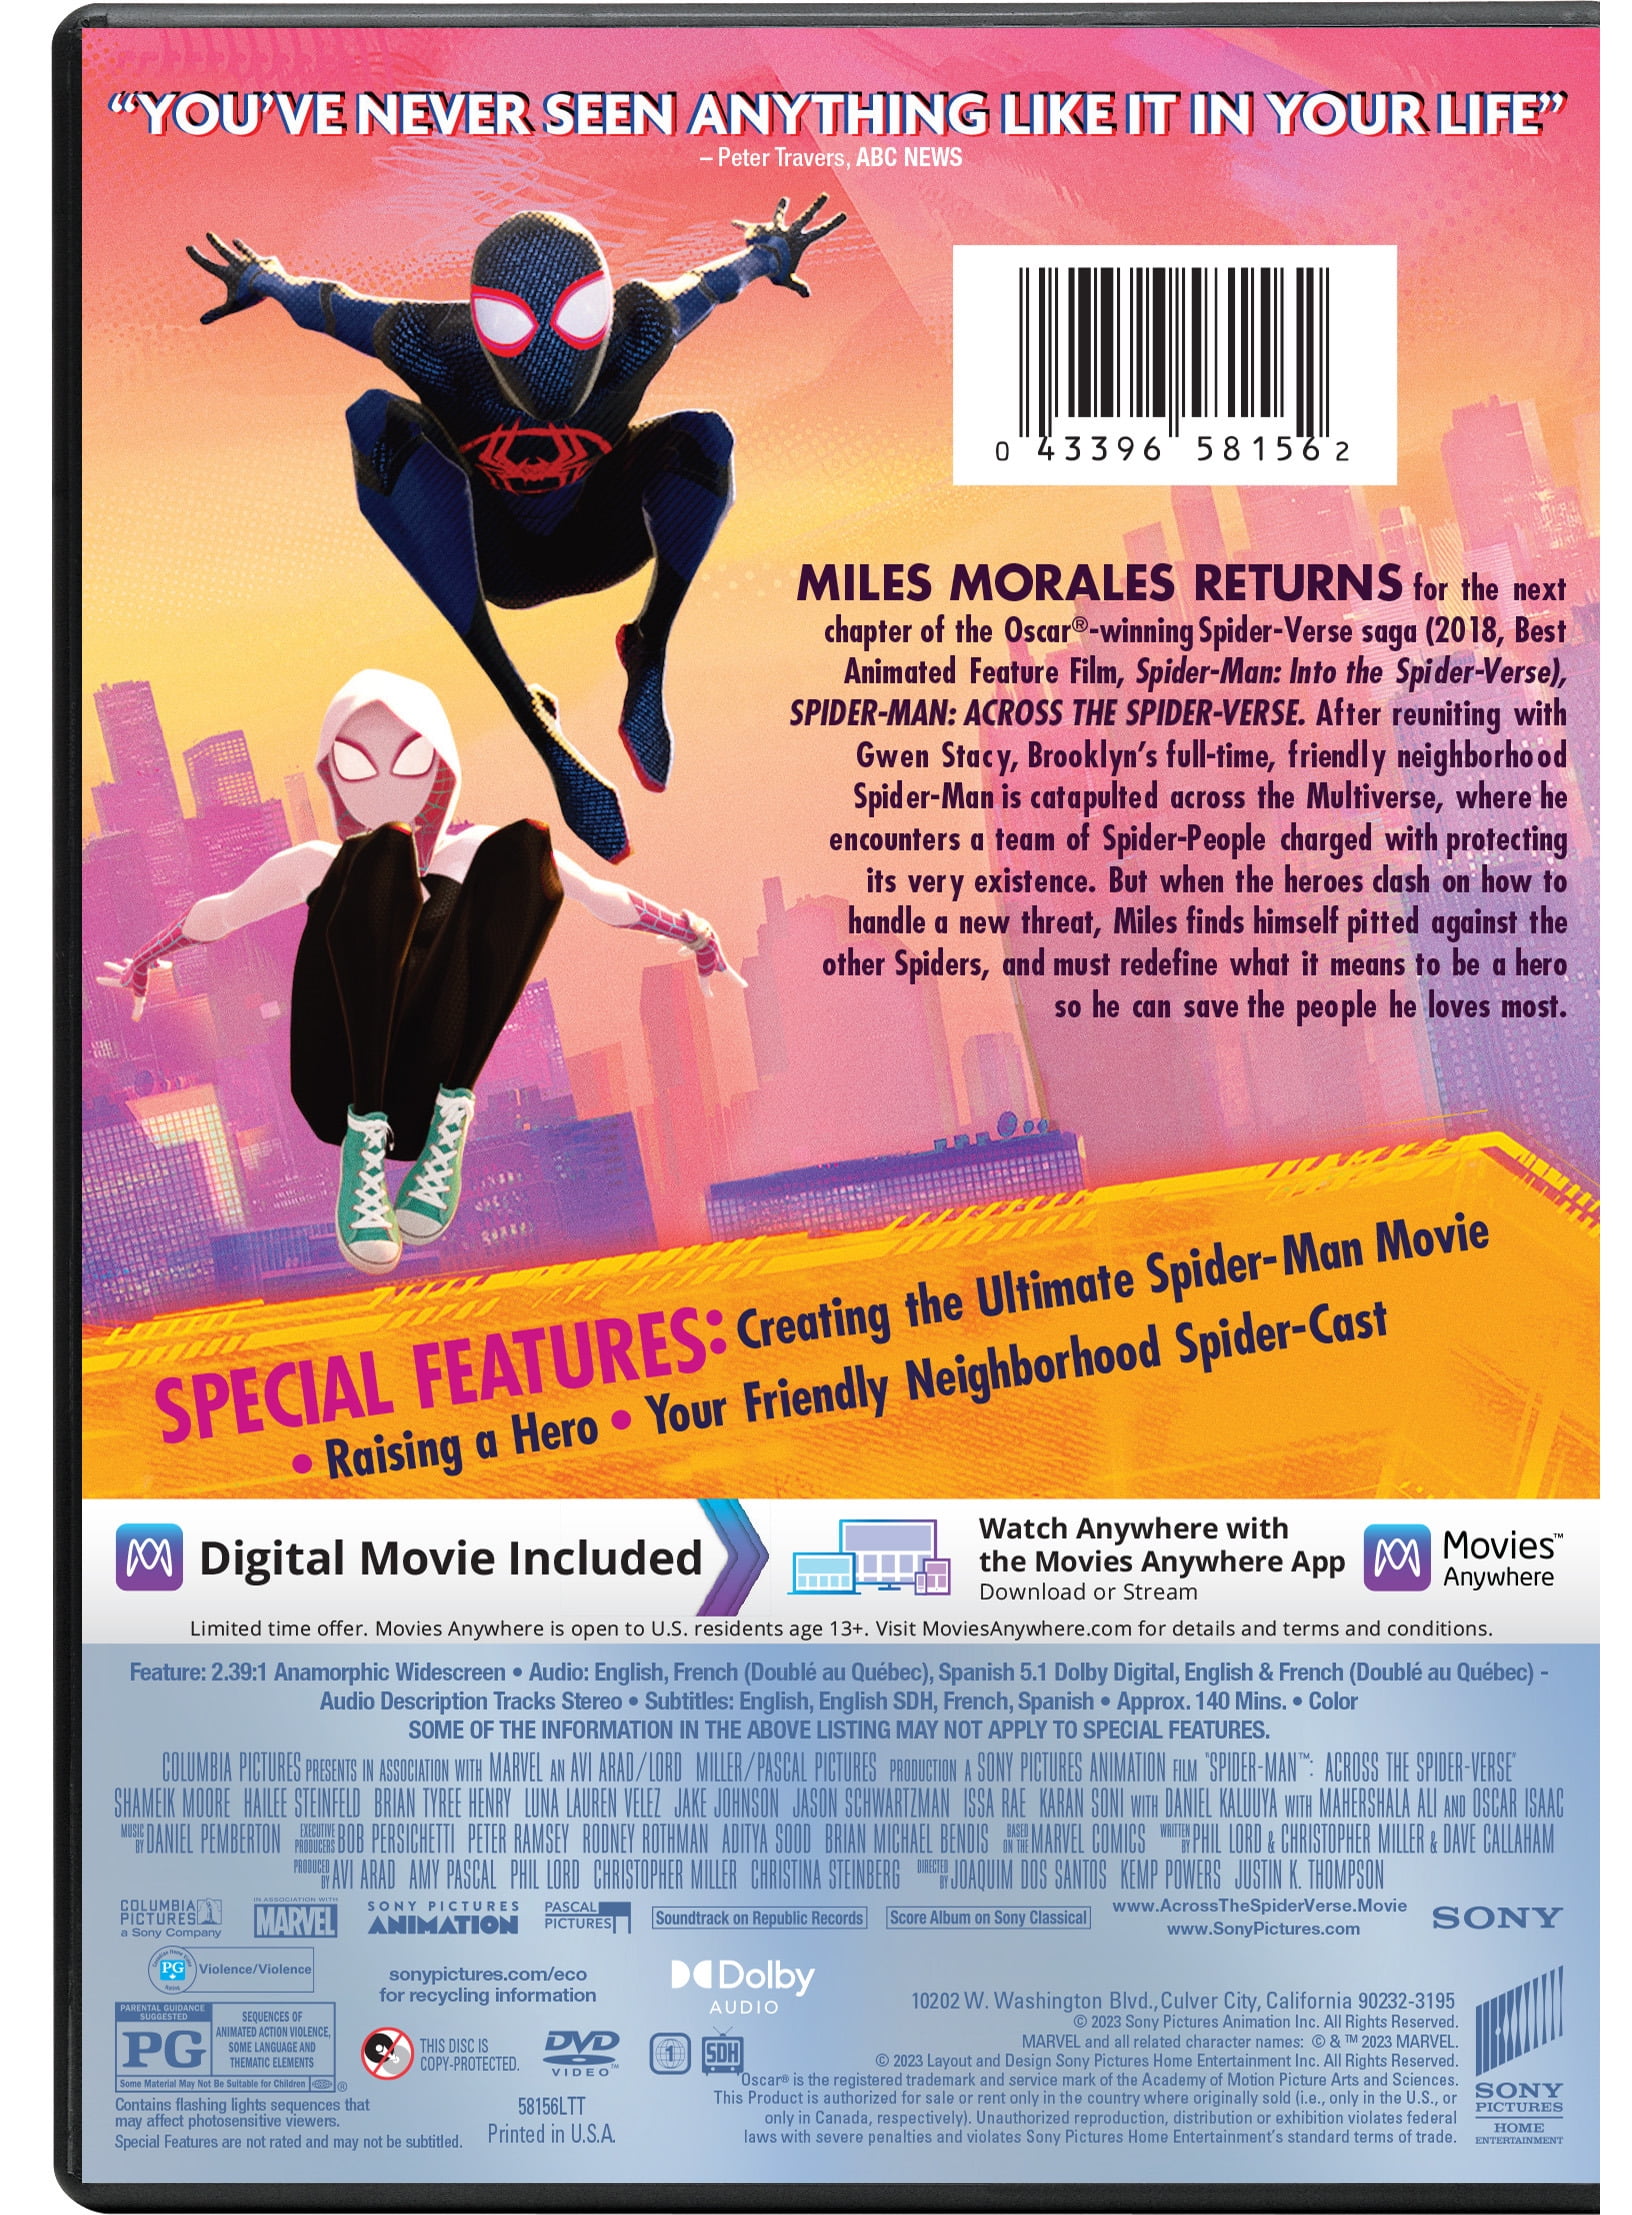 Spider-man : Across The Spider-verse (blu-ray + Dvd Combo +